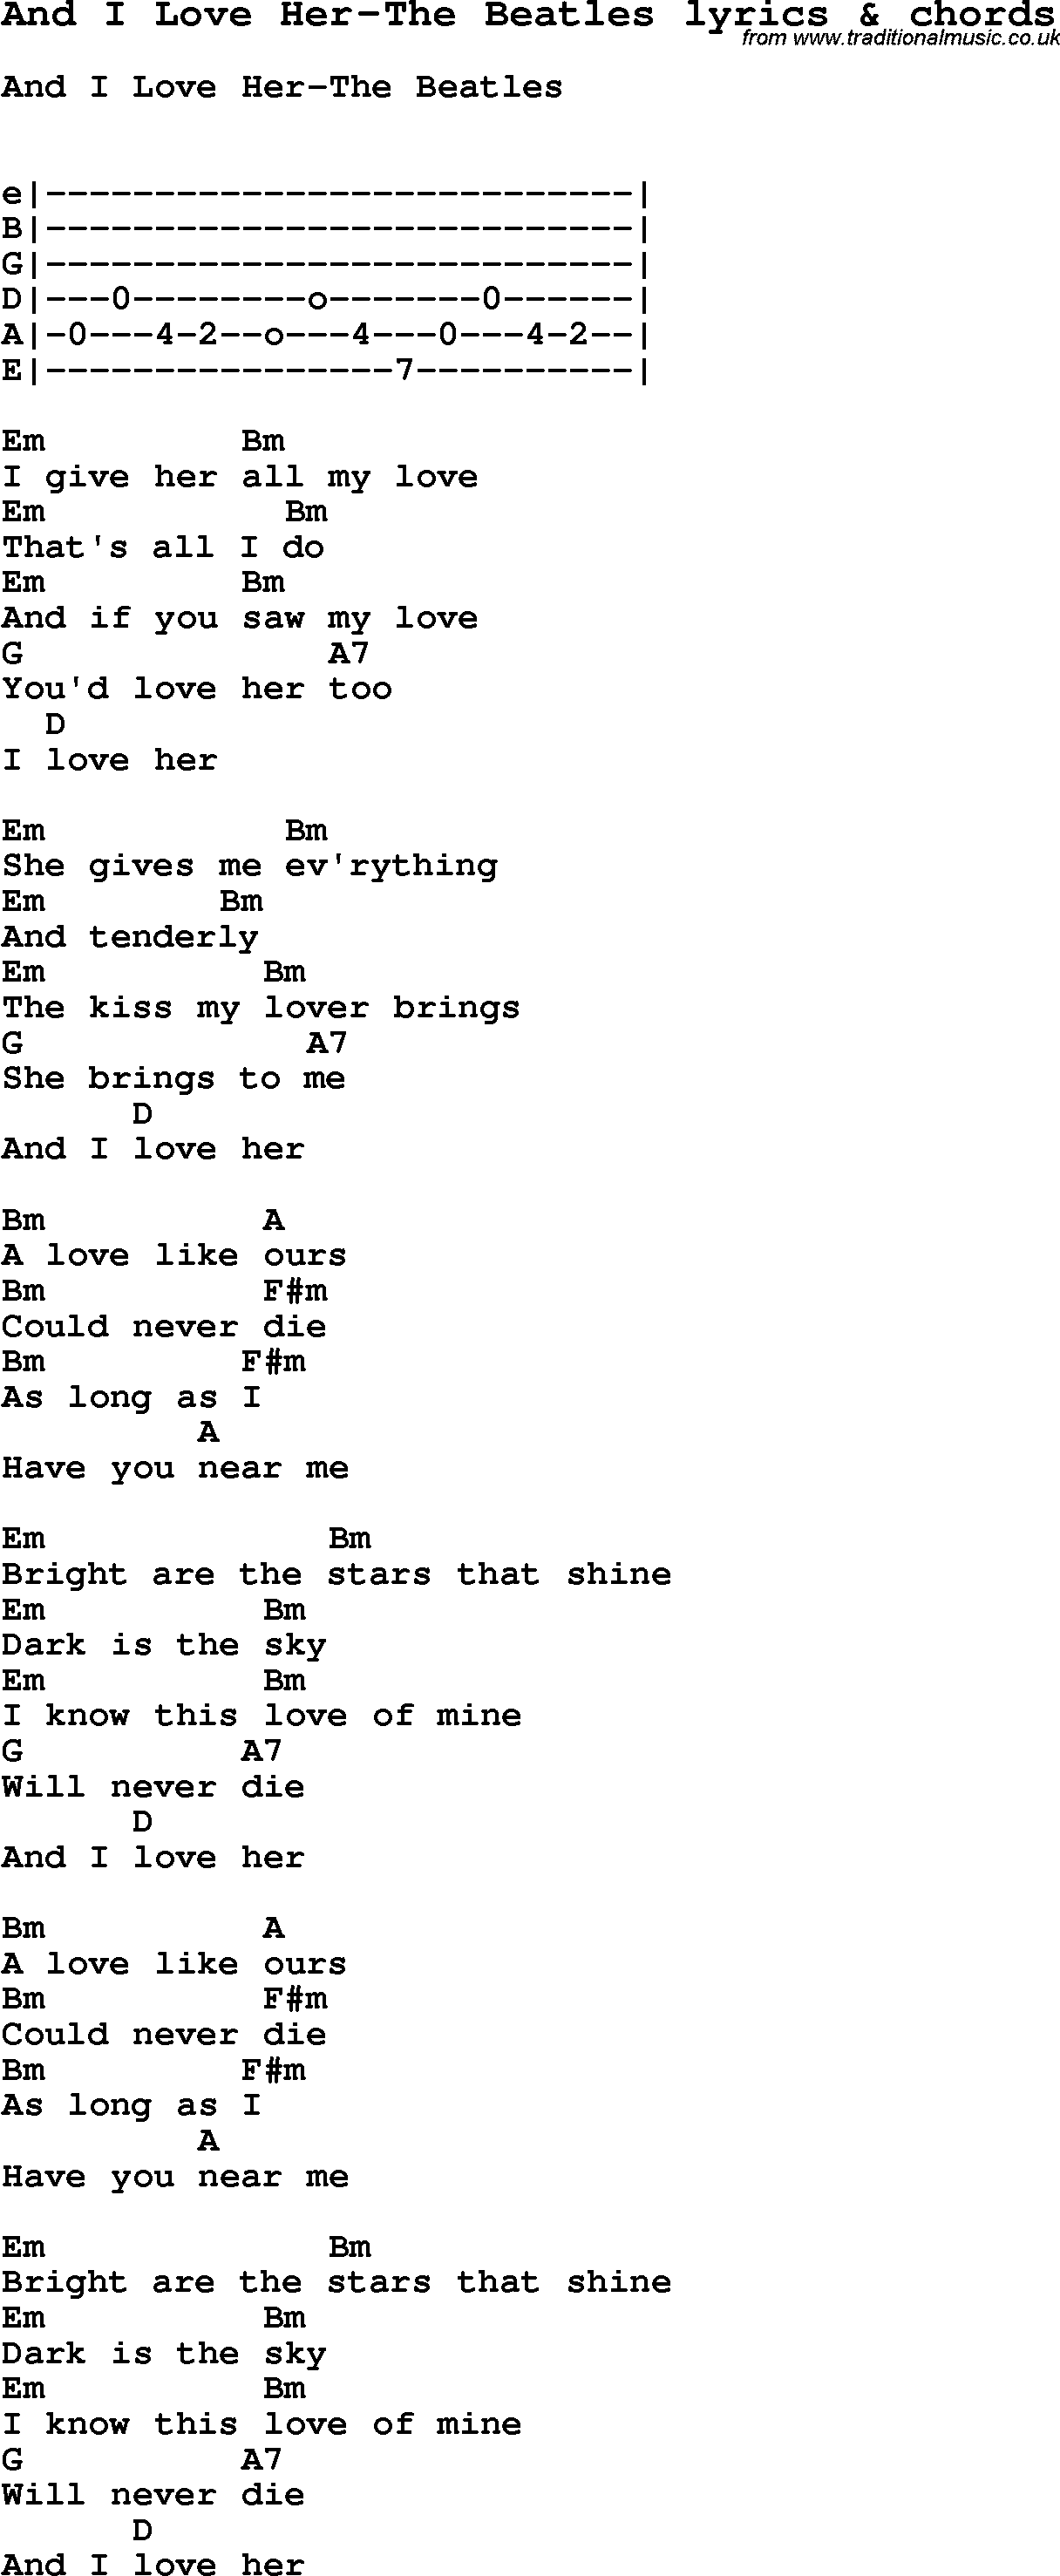 Love Song Lyrics For And I Love Her The Beatles With Chords